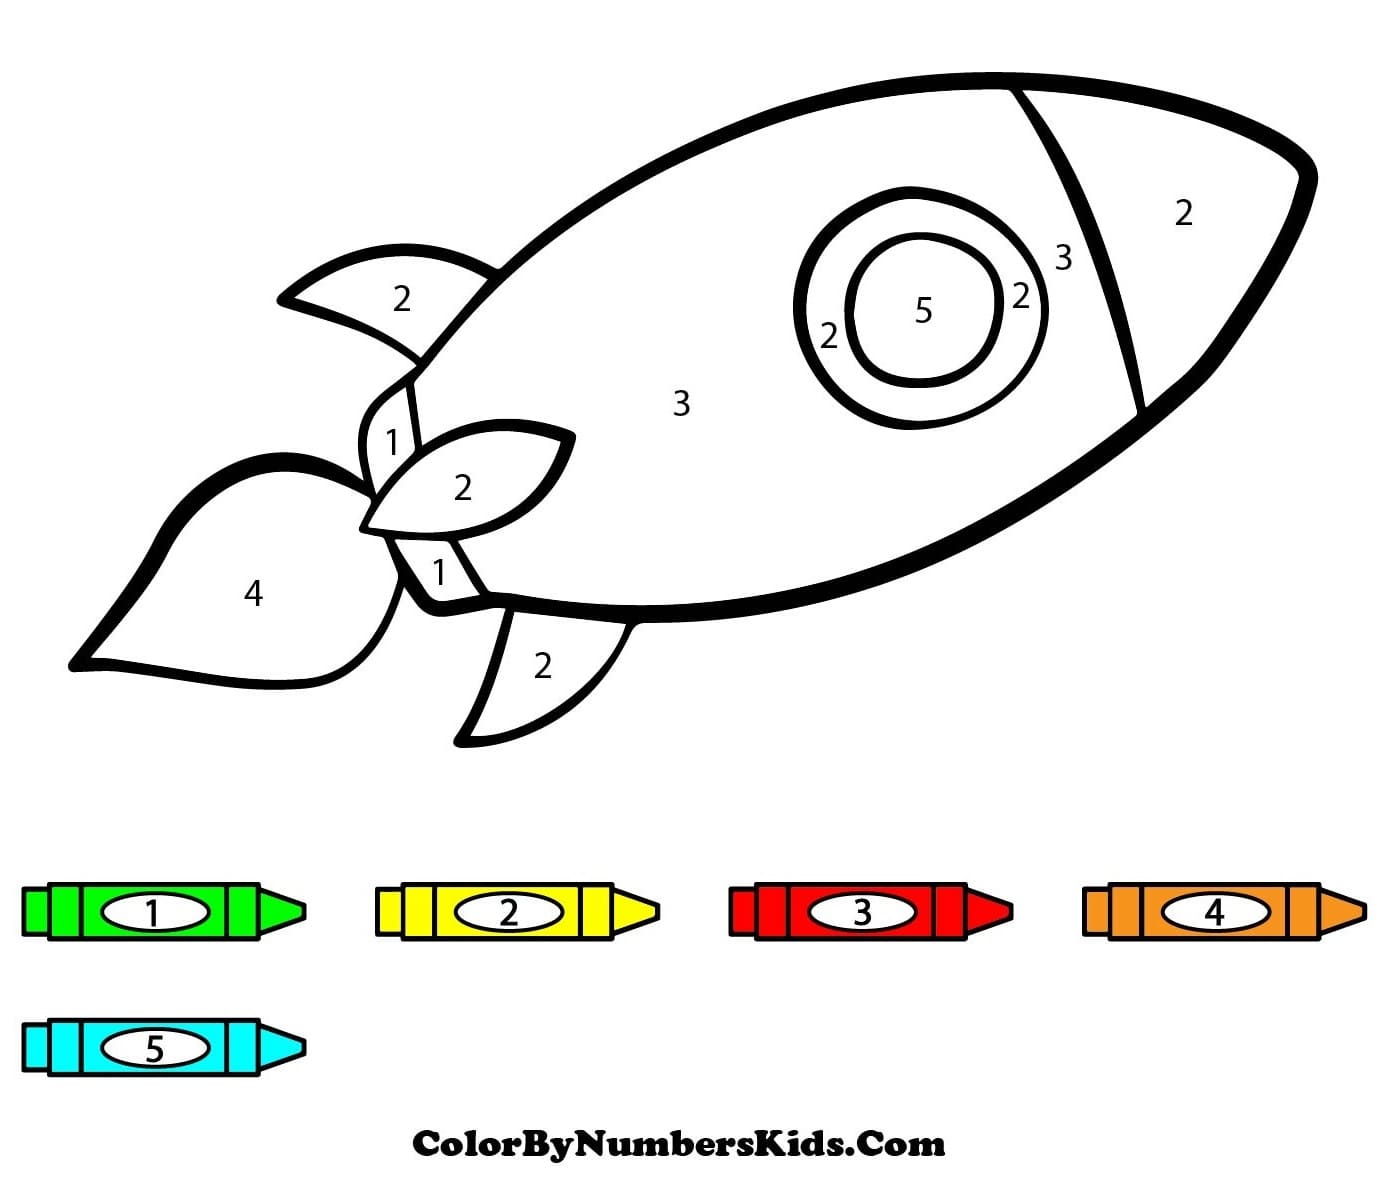 Rocket Fly Color By Number